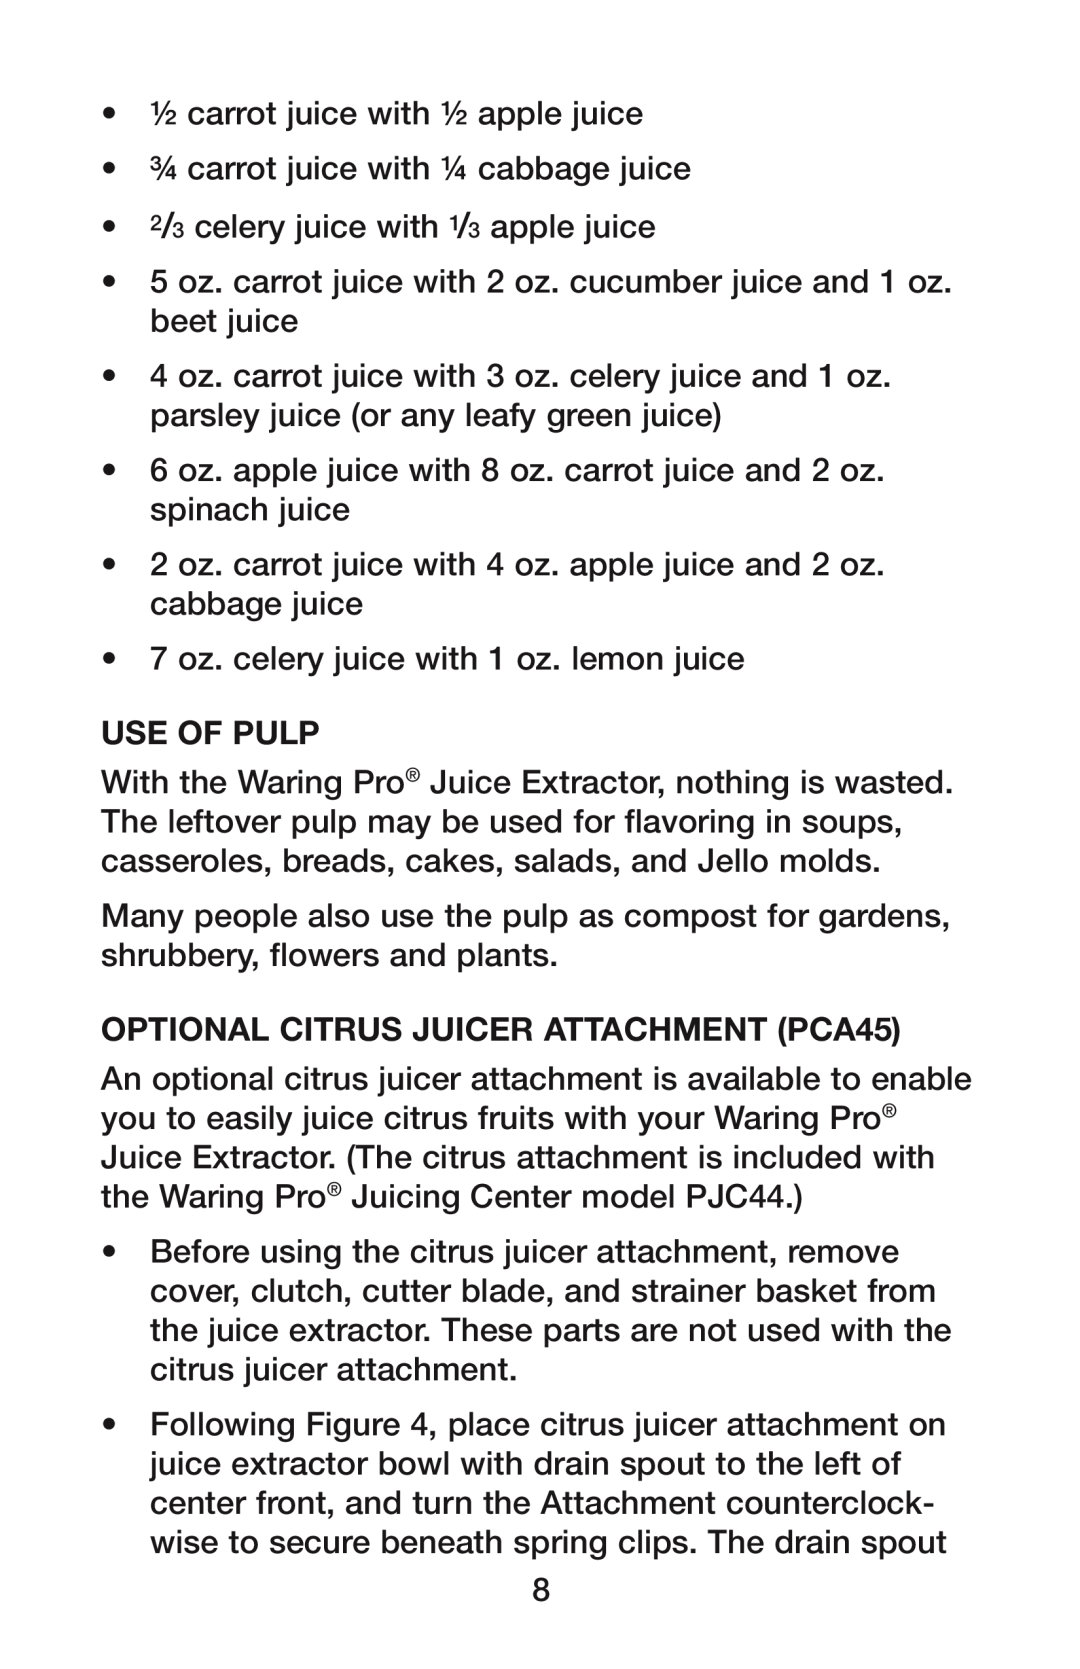 Waring PJE Series manual Use Of Pulp, Optional Citrus Juicer Attachment PCA45 